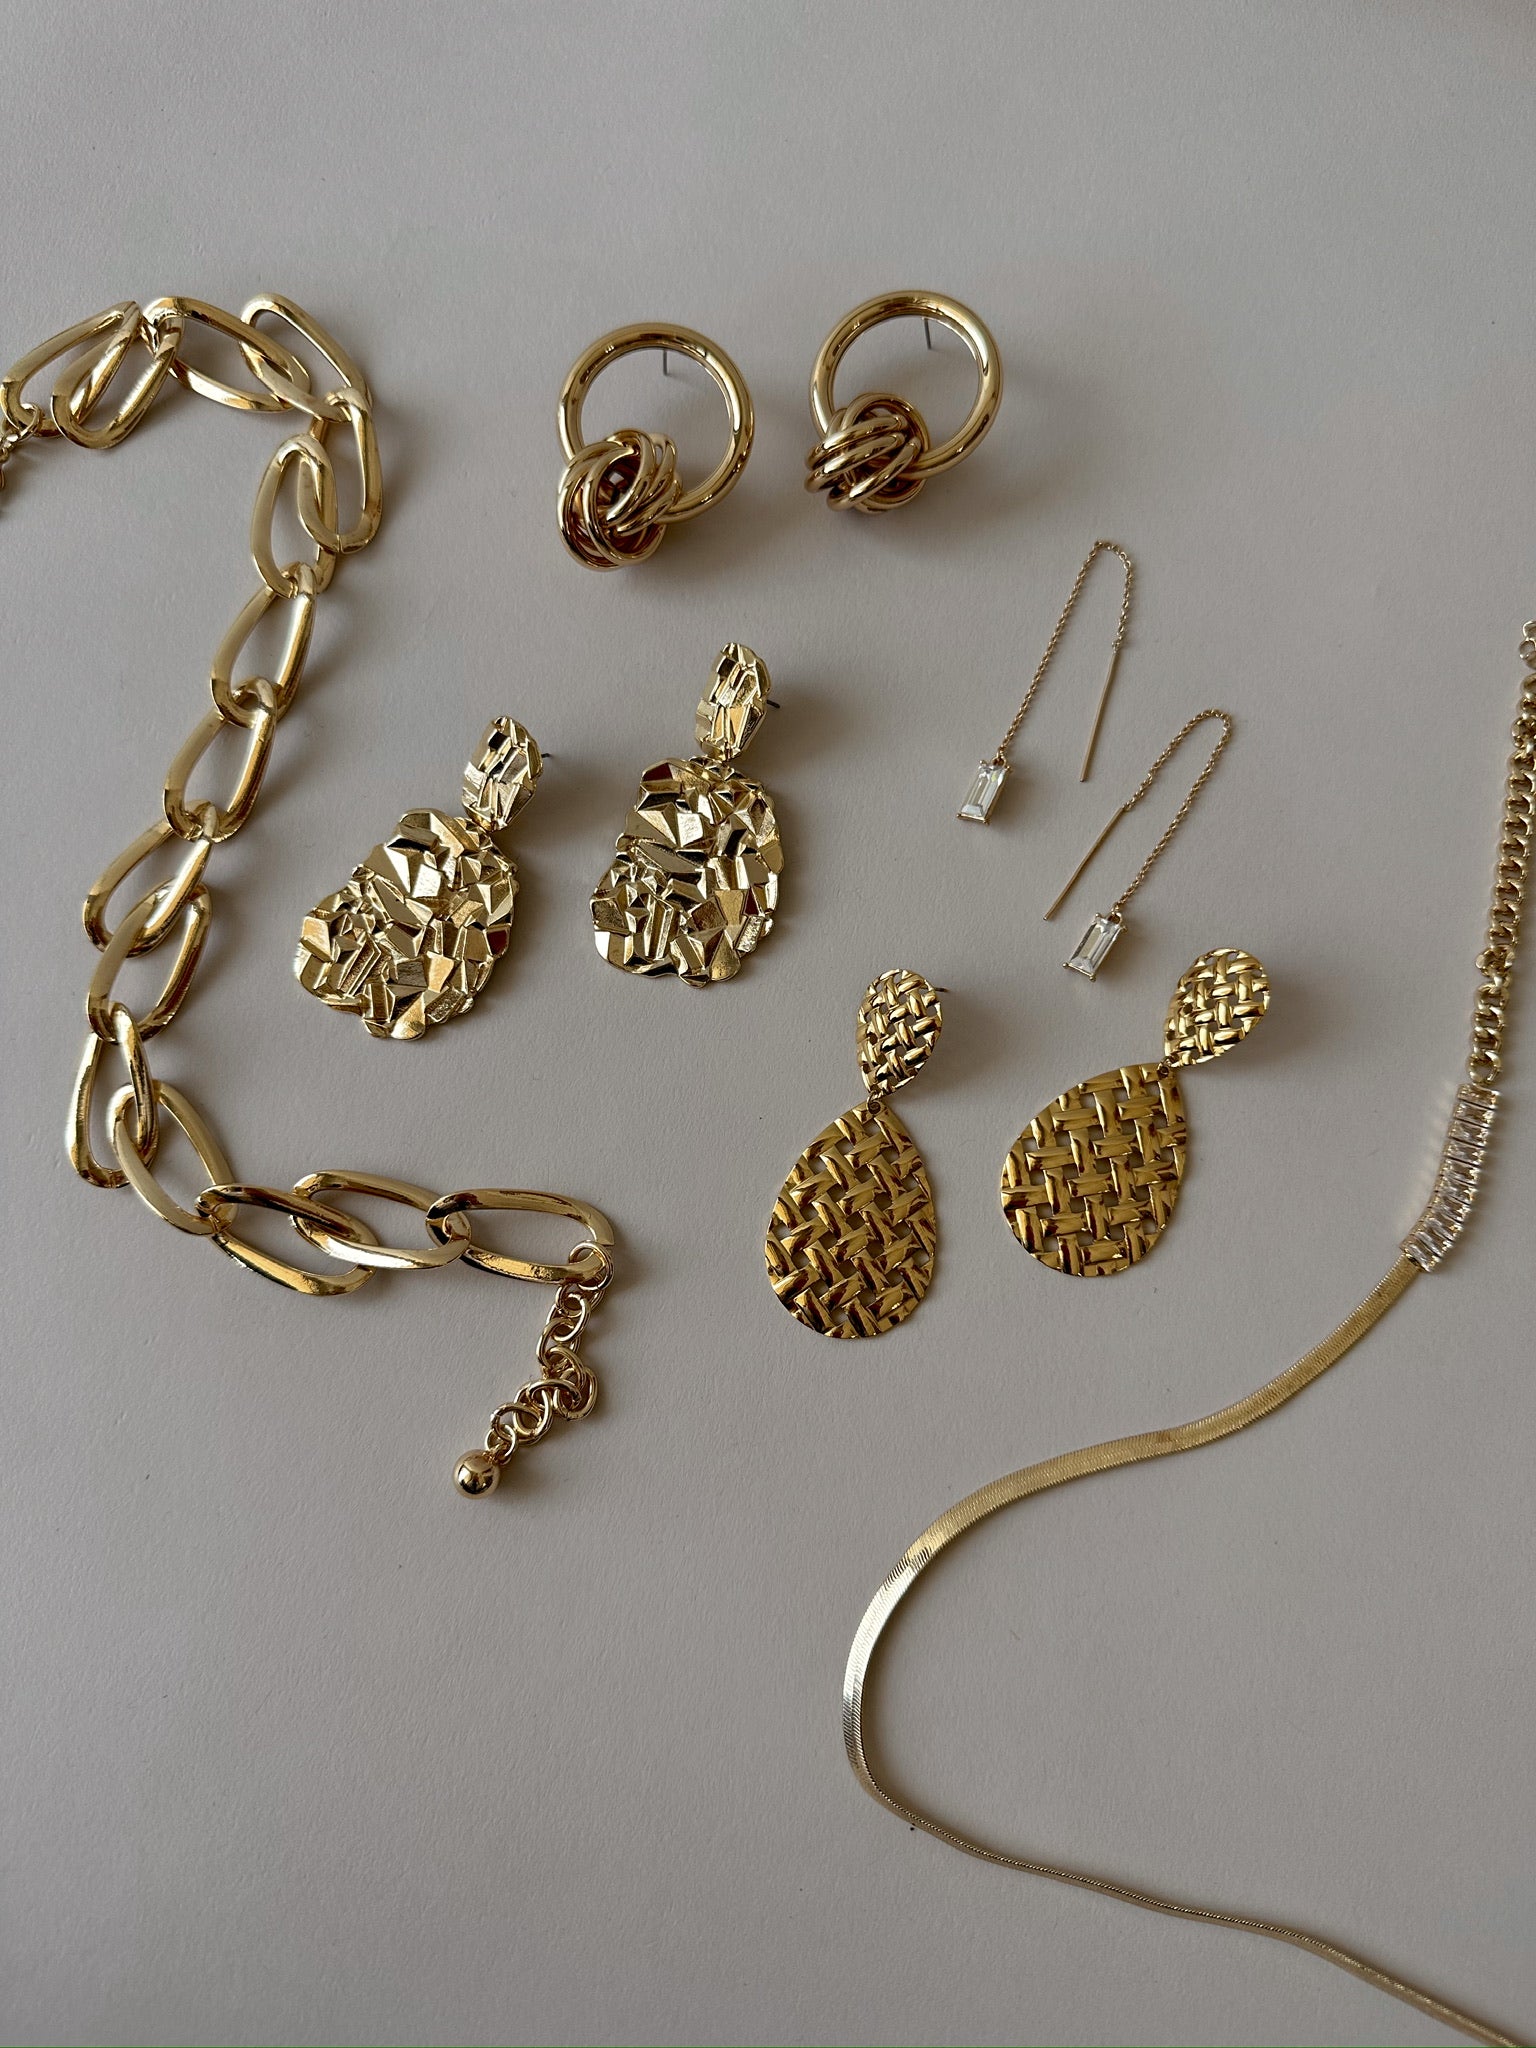 gold earrings, gold hoops, 2 gold necklaces laid out flat on grey paper